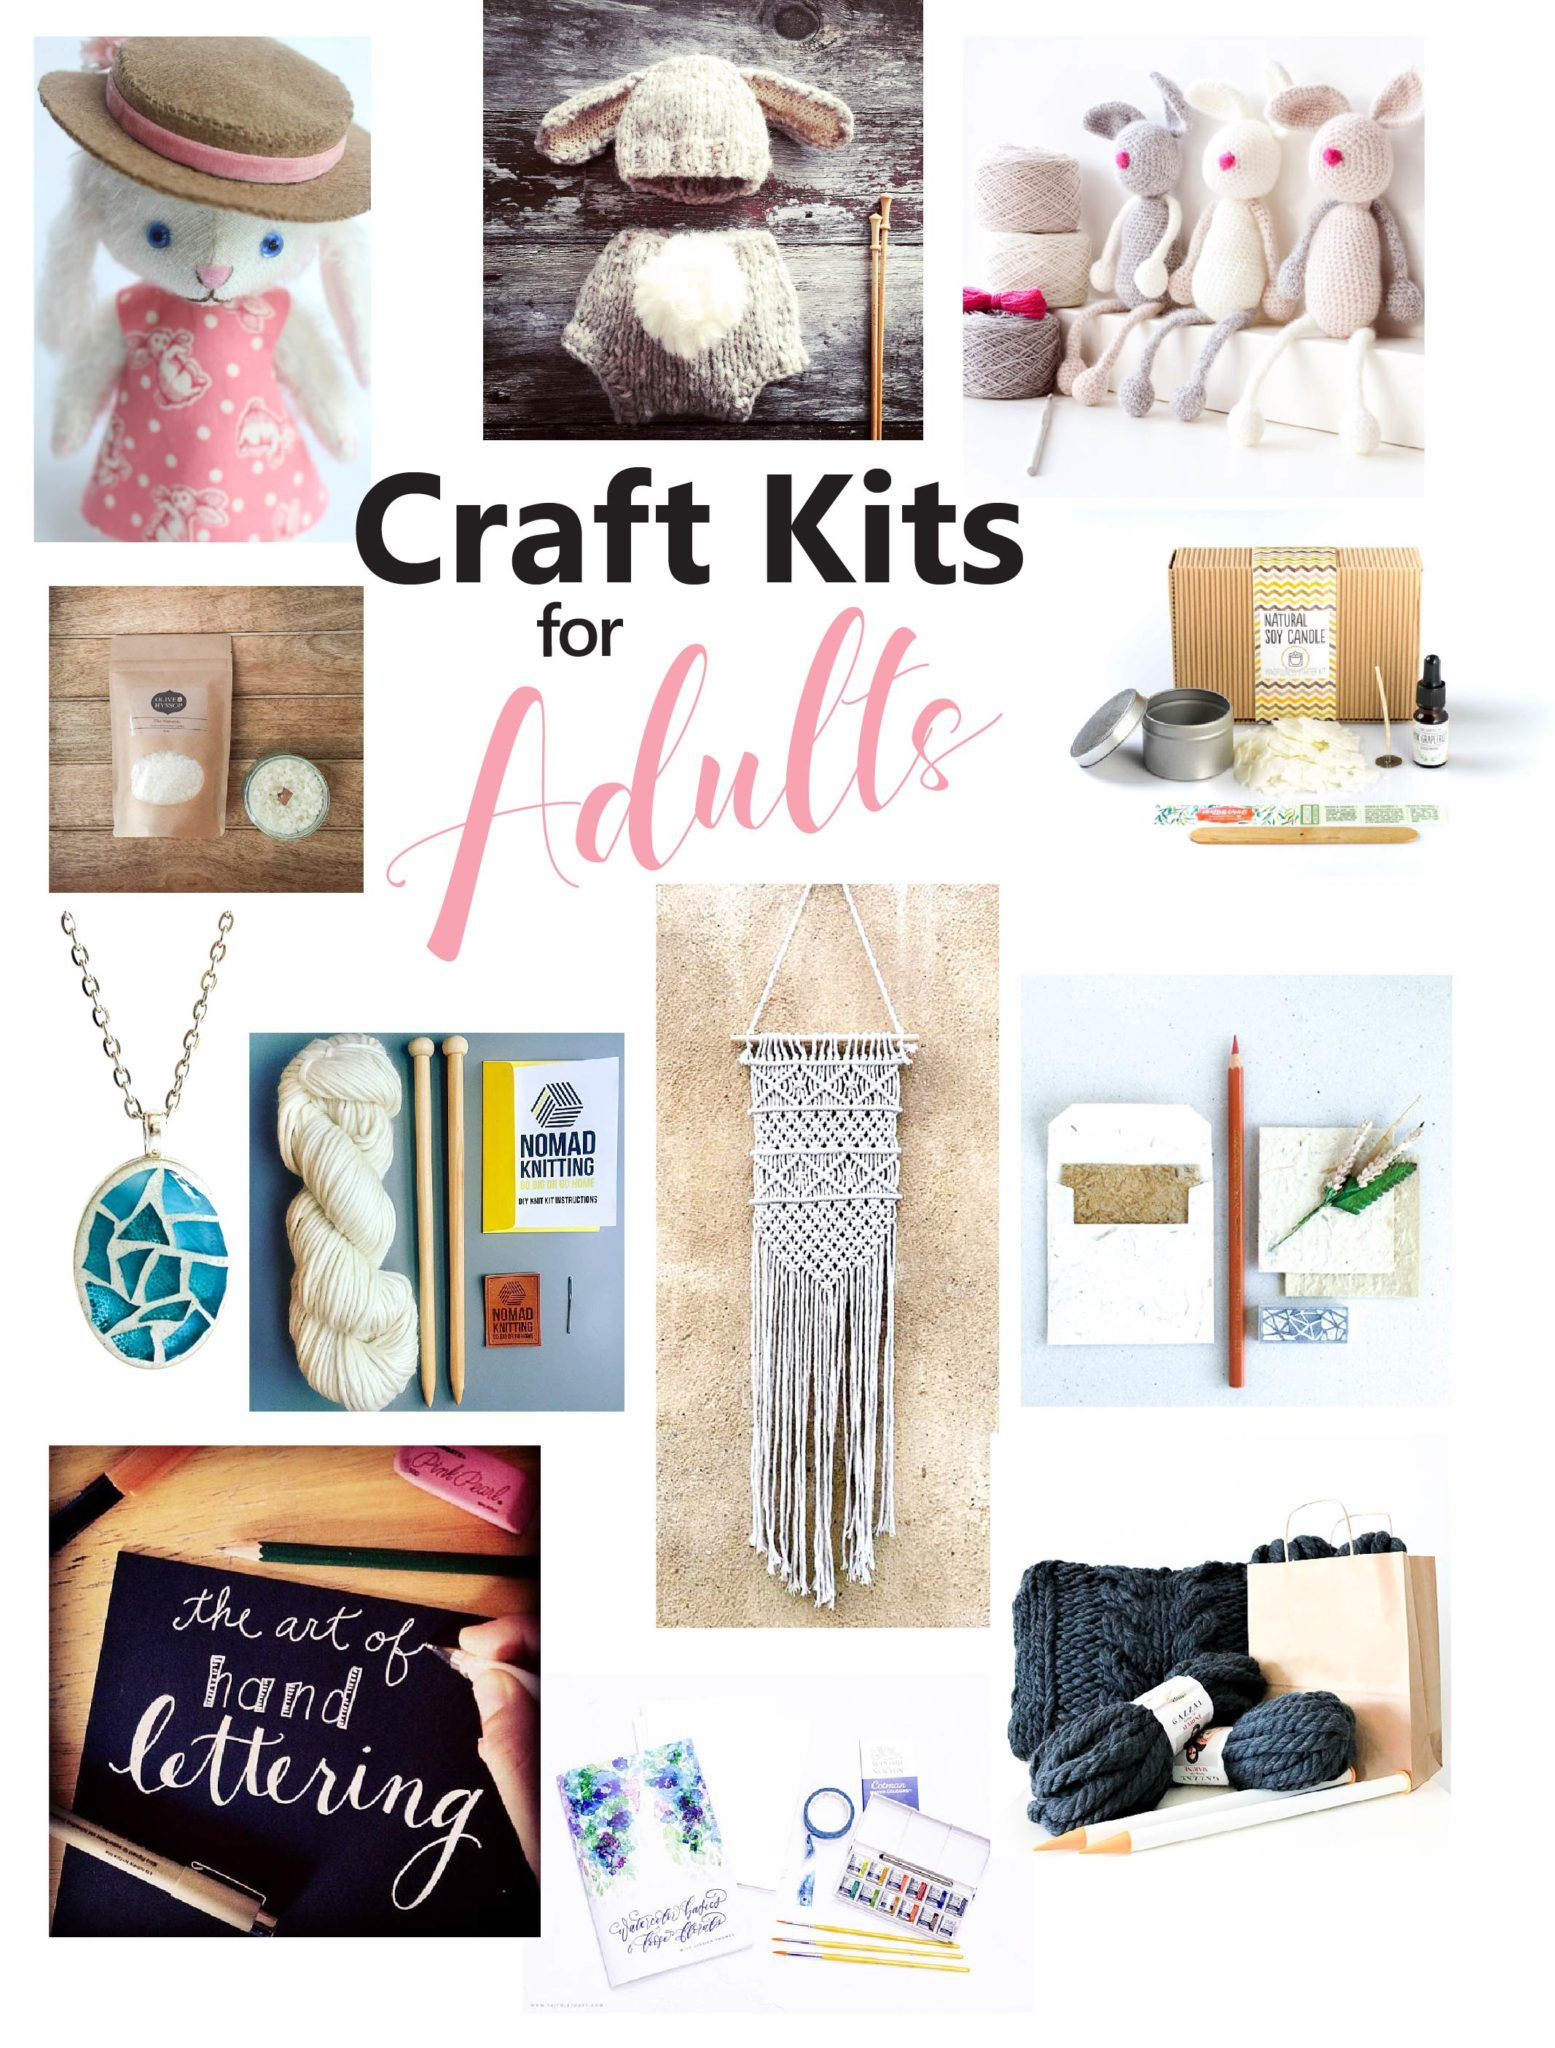 Arts And Craft Kits For Adults
 The Best Craft Kits for Adults – Sustain My Craft Habit